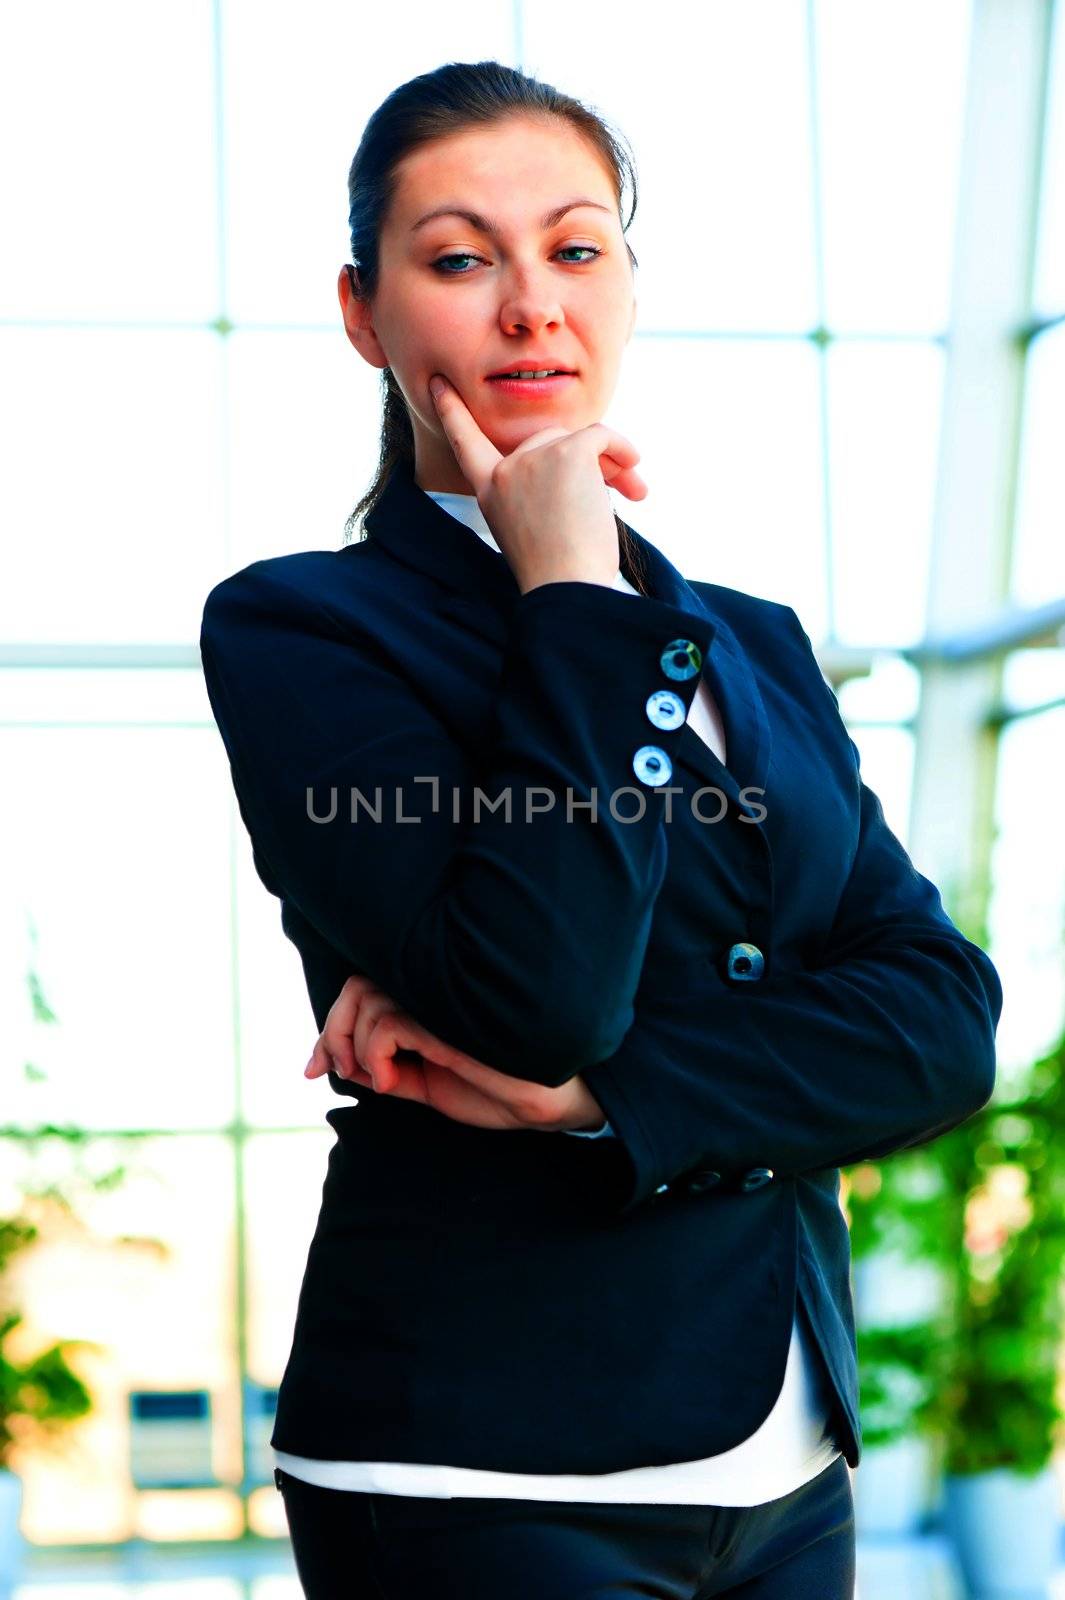 Portrait of successful businesswoman smiling on the background of a blurred office interior by kosmsos111